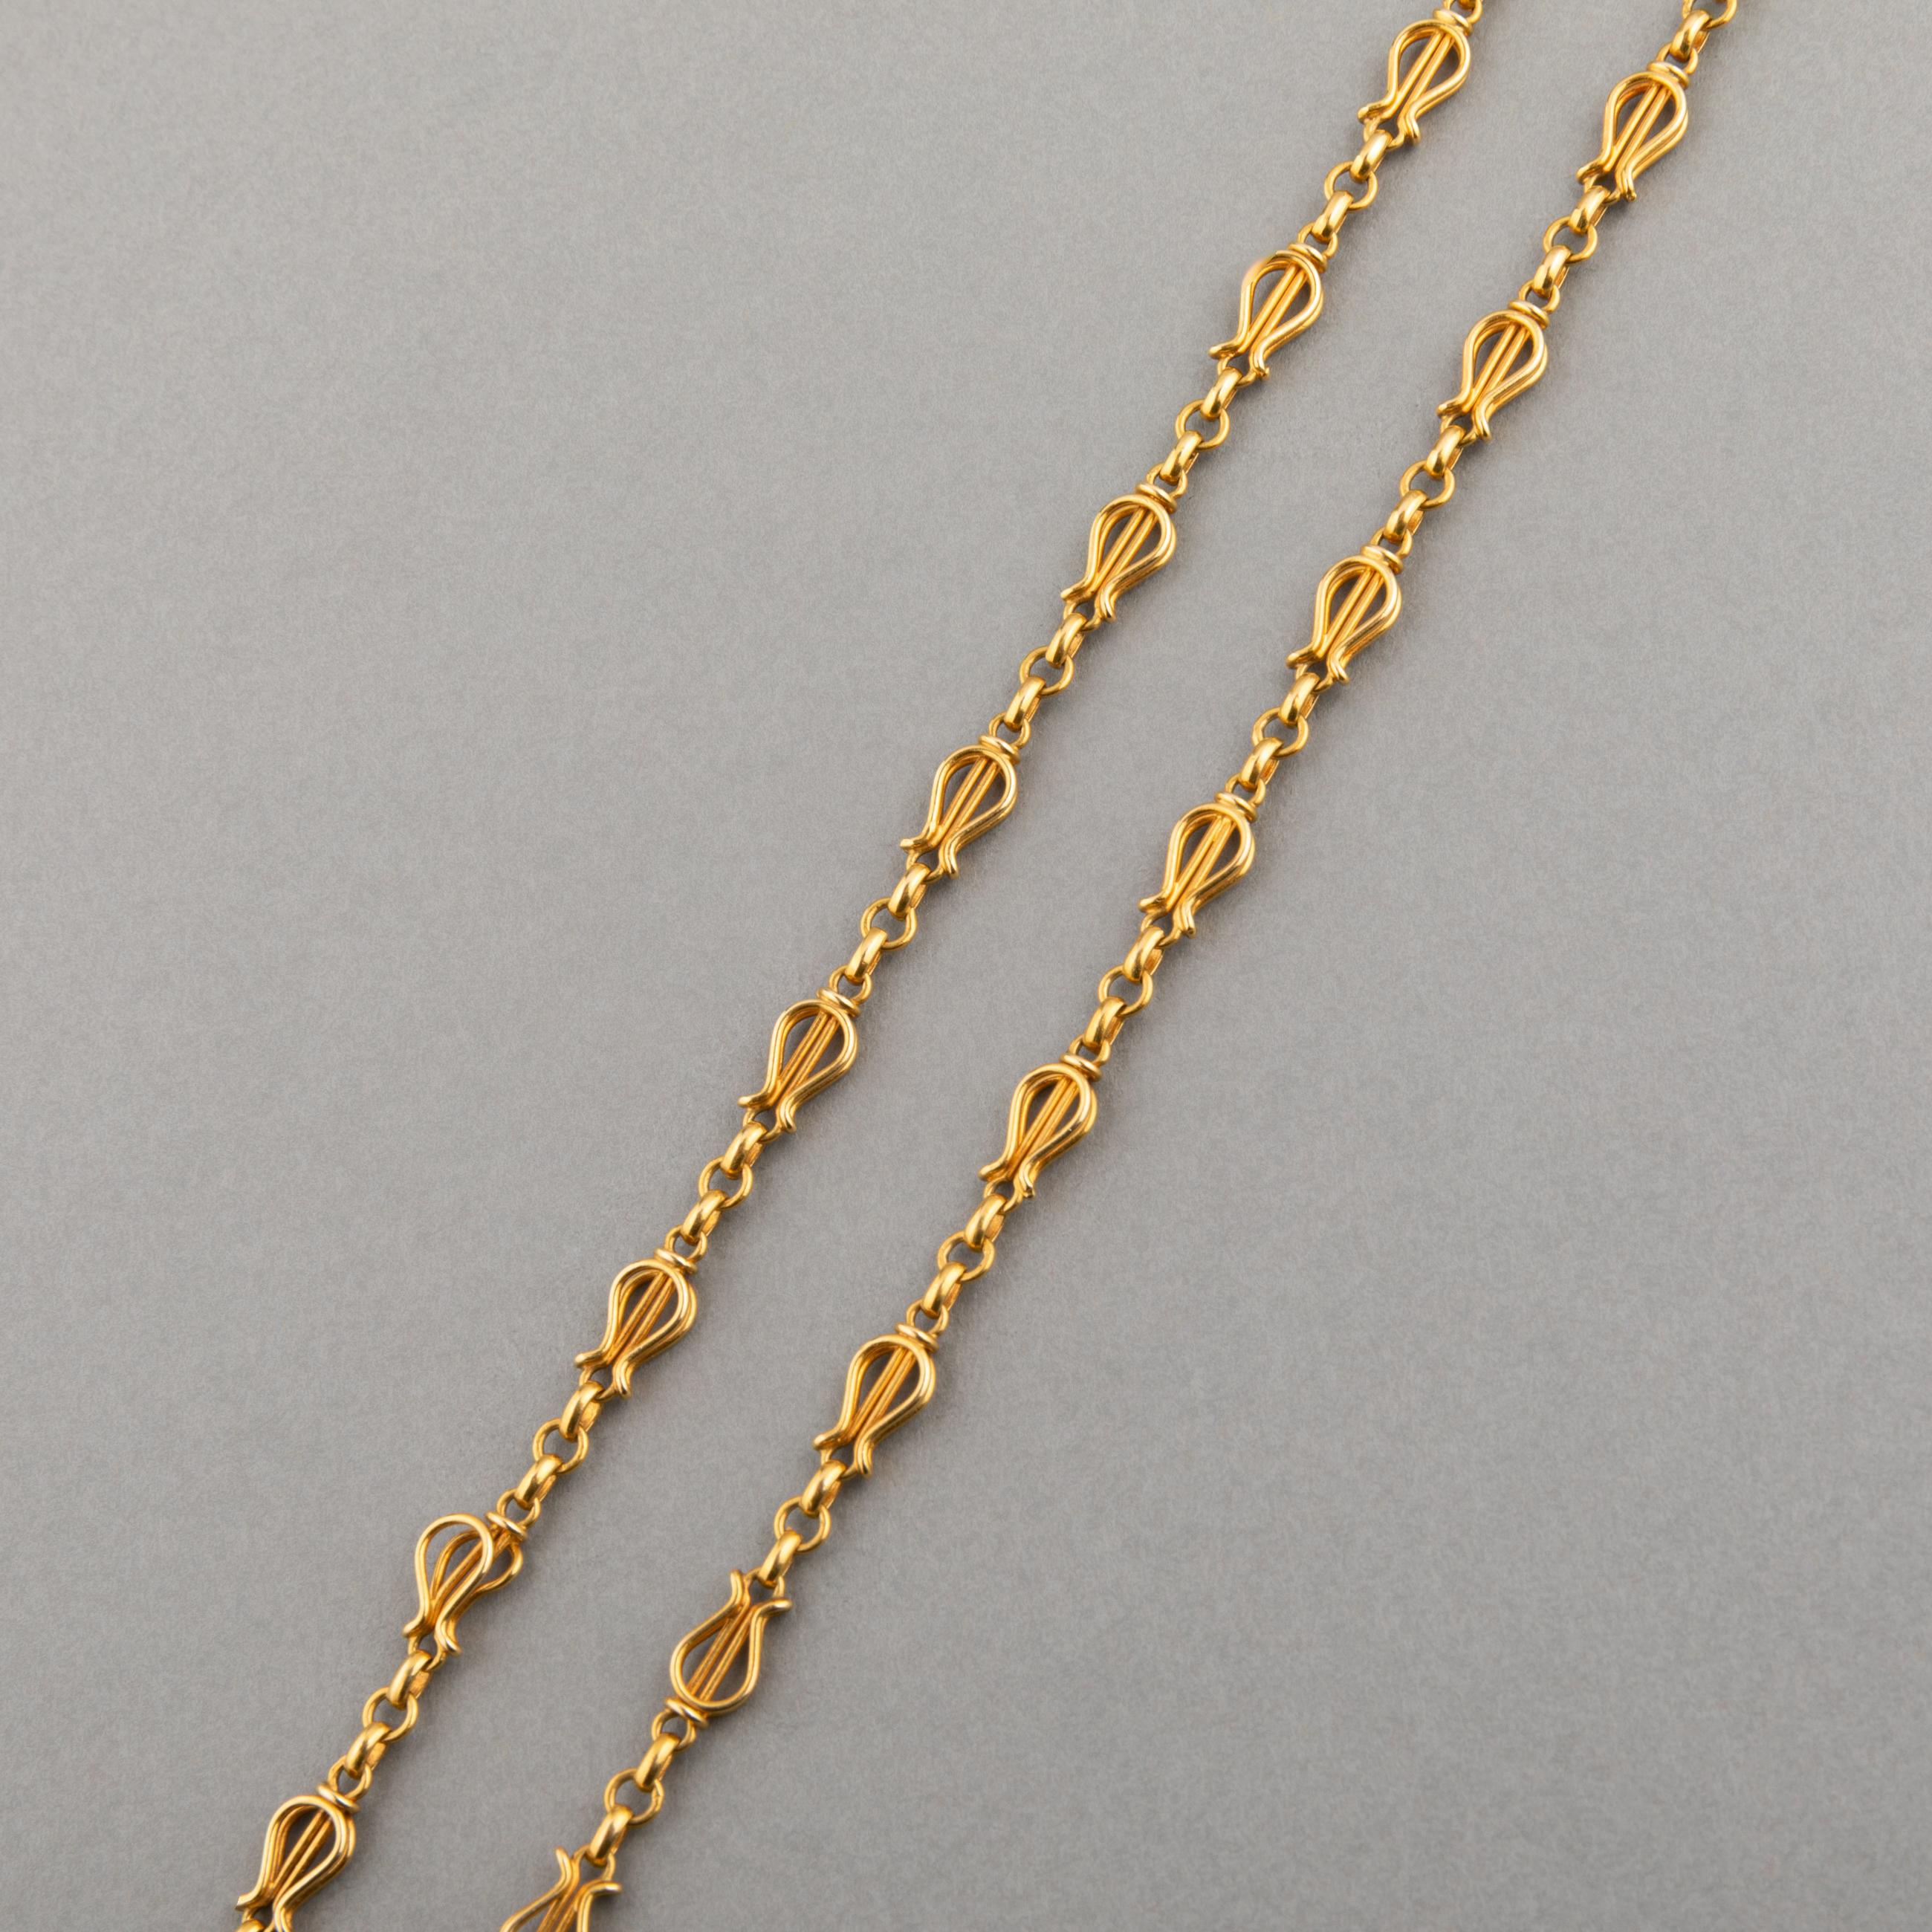 A beautiful chain necklace, made in France circa 1890.

Made in yellow gold 18k, 158 cm length.  You can wear three turns.

French hallmarks: eagle head and maker;

Weight: 43.30 grams